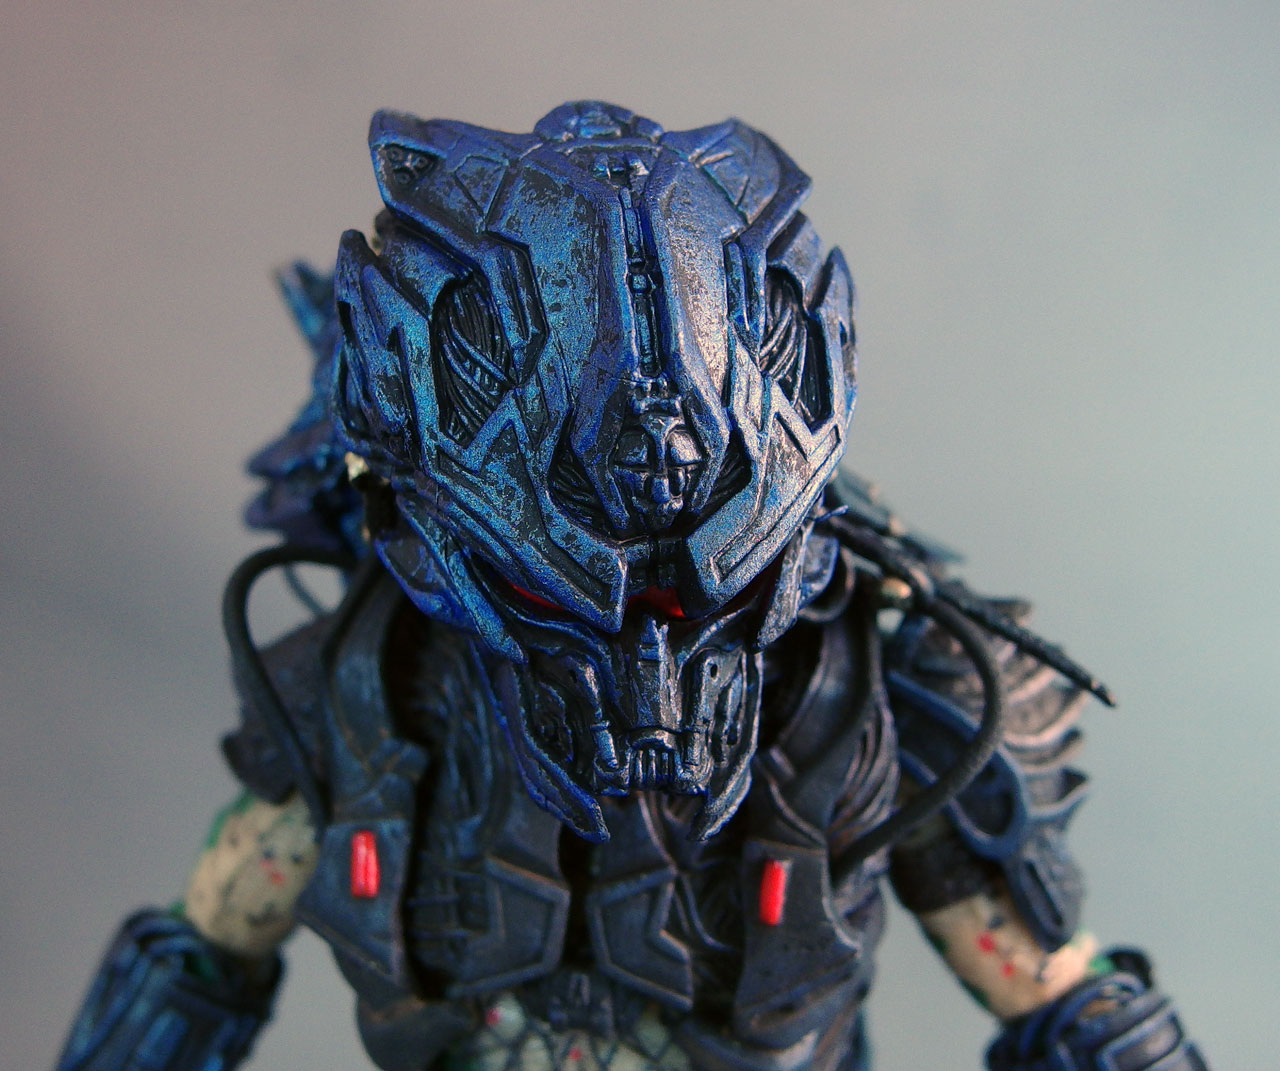 Review Battle Armor Lost Predator Predator 2 Neca W Sculptors Commentary Poe Ghostal S Points Of Articulation